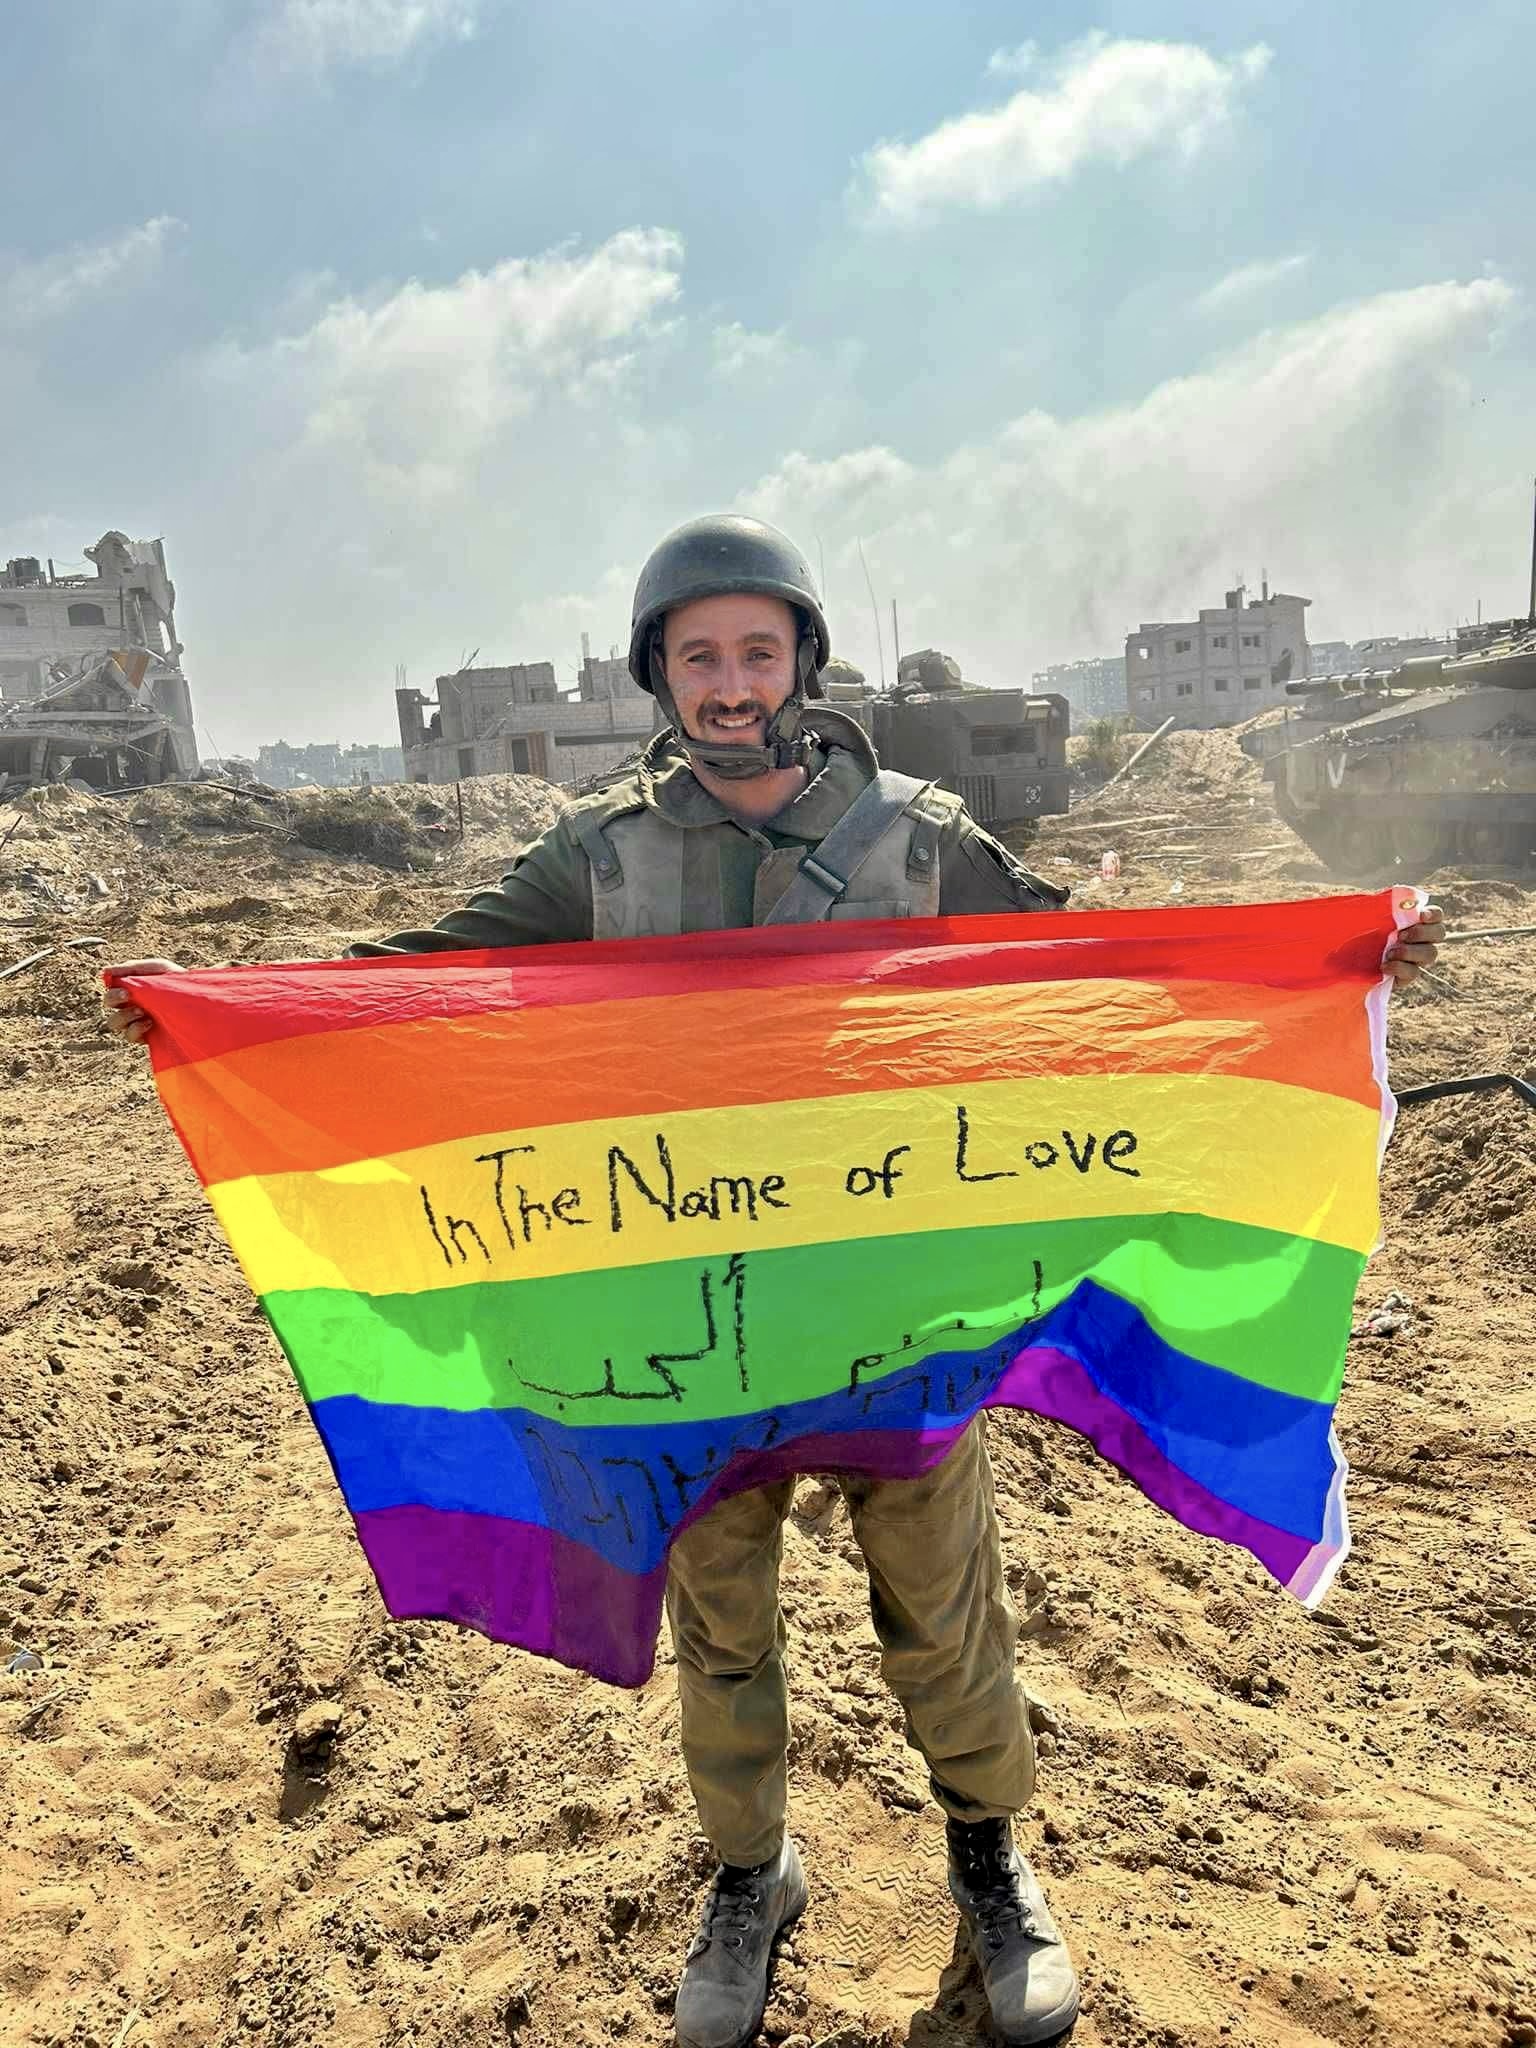 This Gay Israeli Soldier Held Up A Pride Flag During Israel’s Invasion Of Gaza And Caused A Huge Controversy